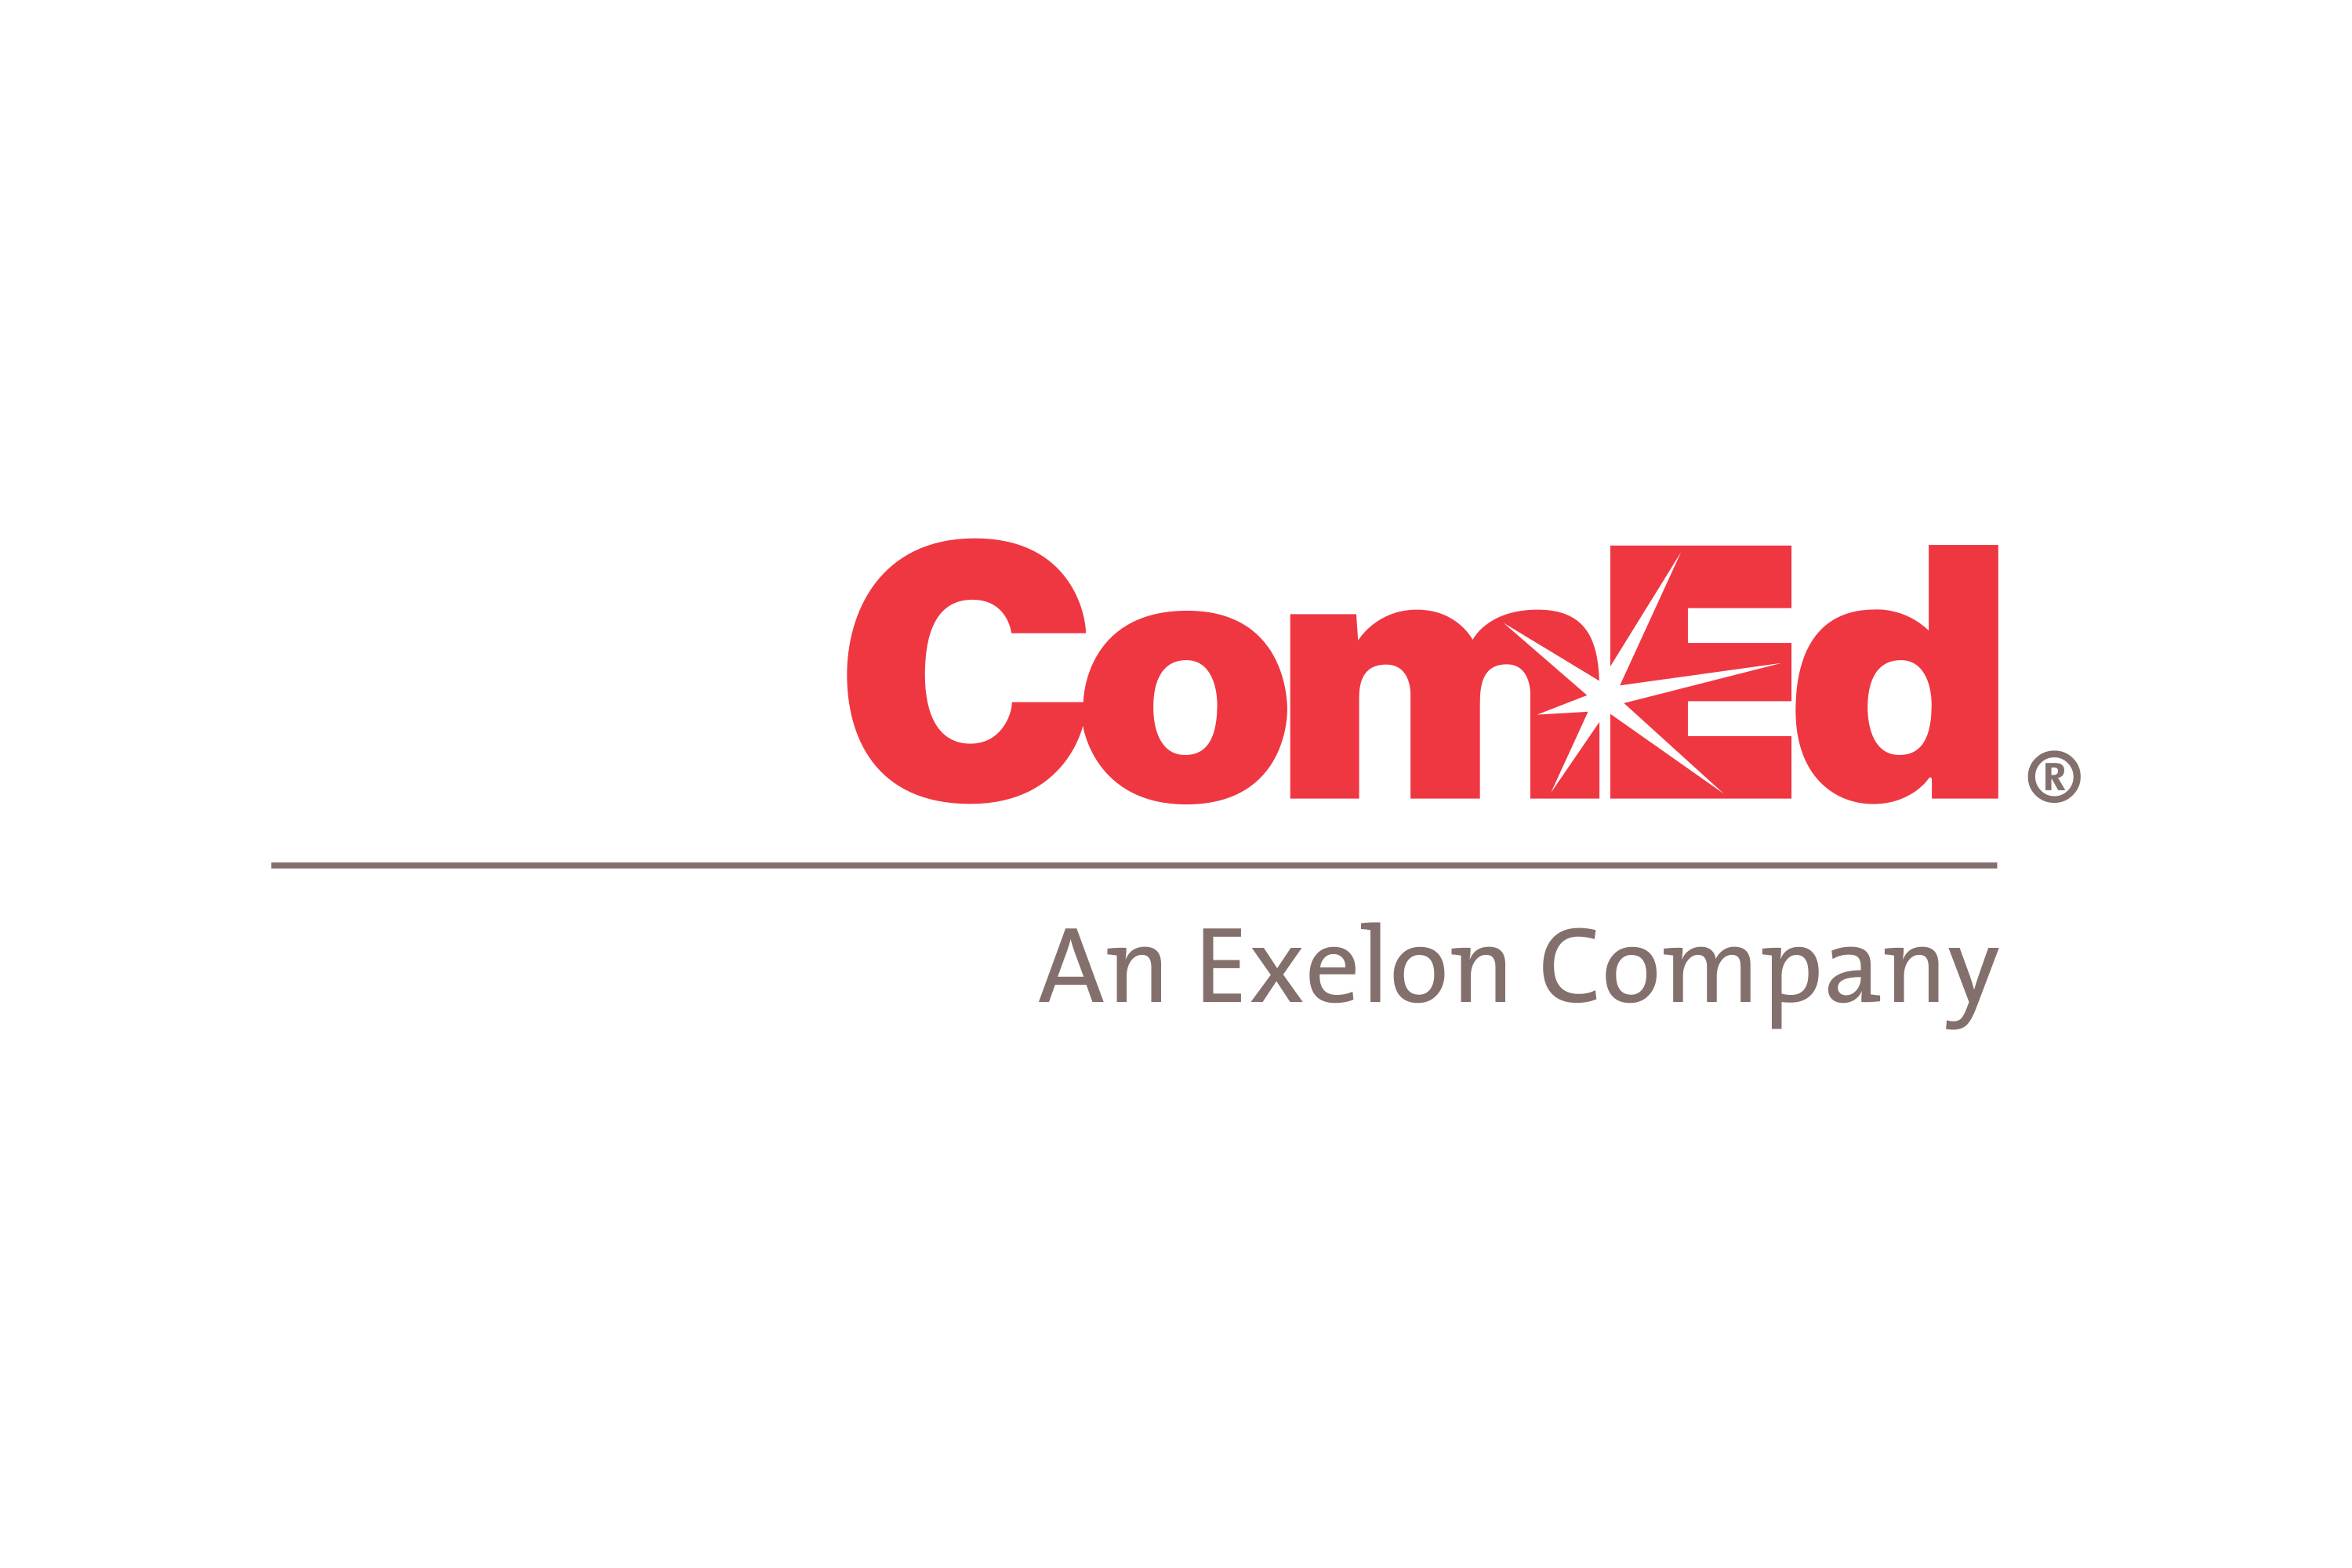 Download Commonwealth Edison Logo in SVG Vector or PNG File Format